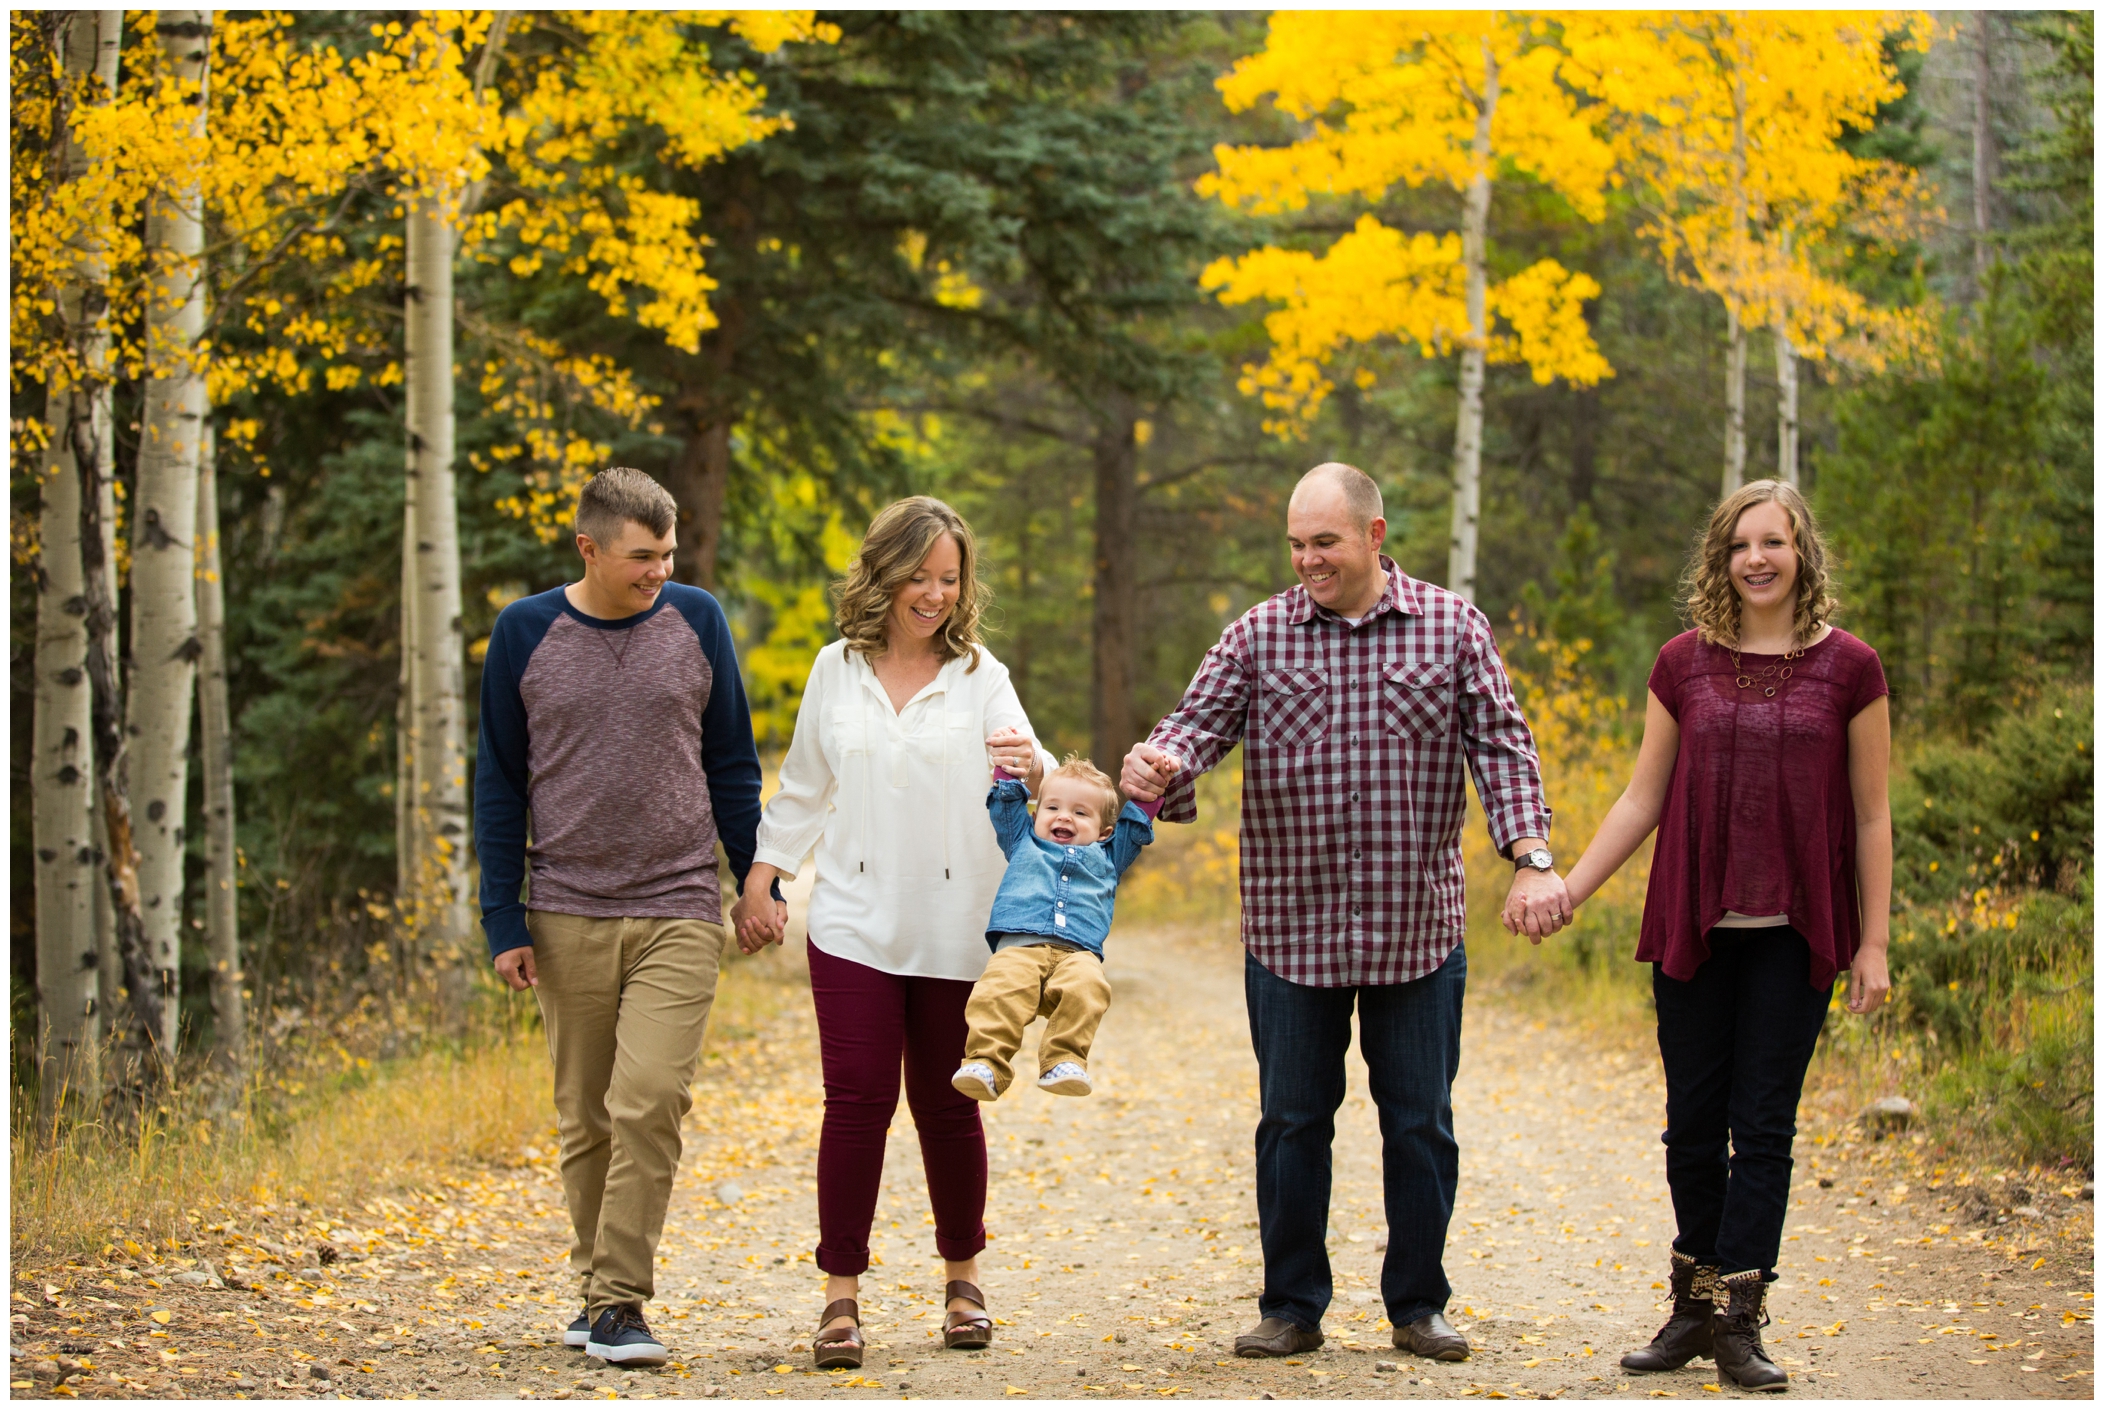 Evergreen Colorado family photos at Frosberg Park by Plum Pretty Photography